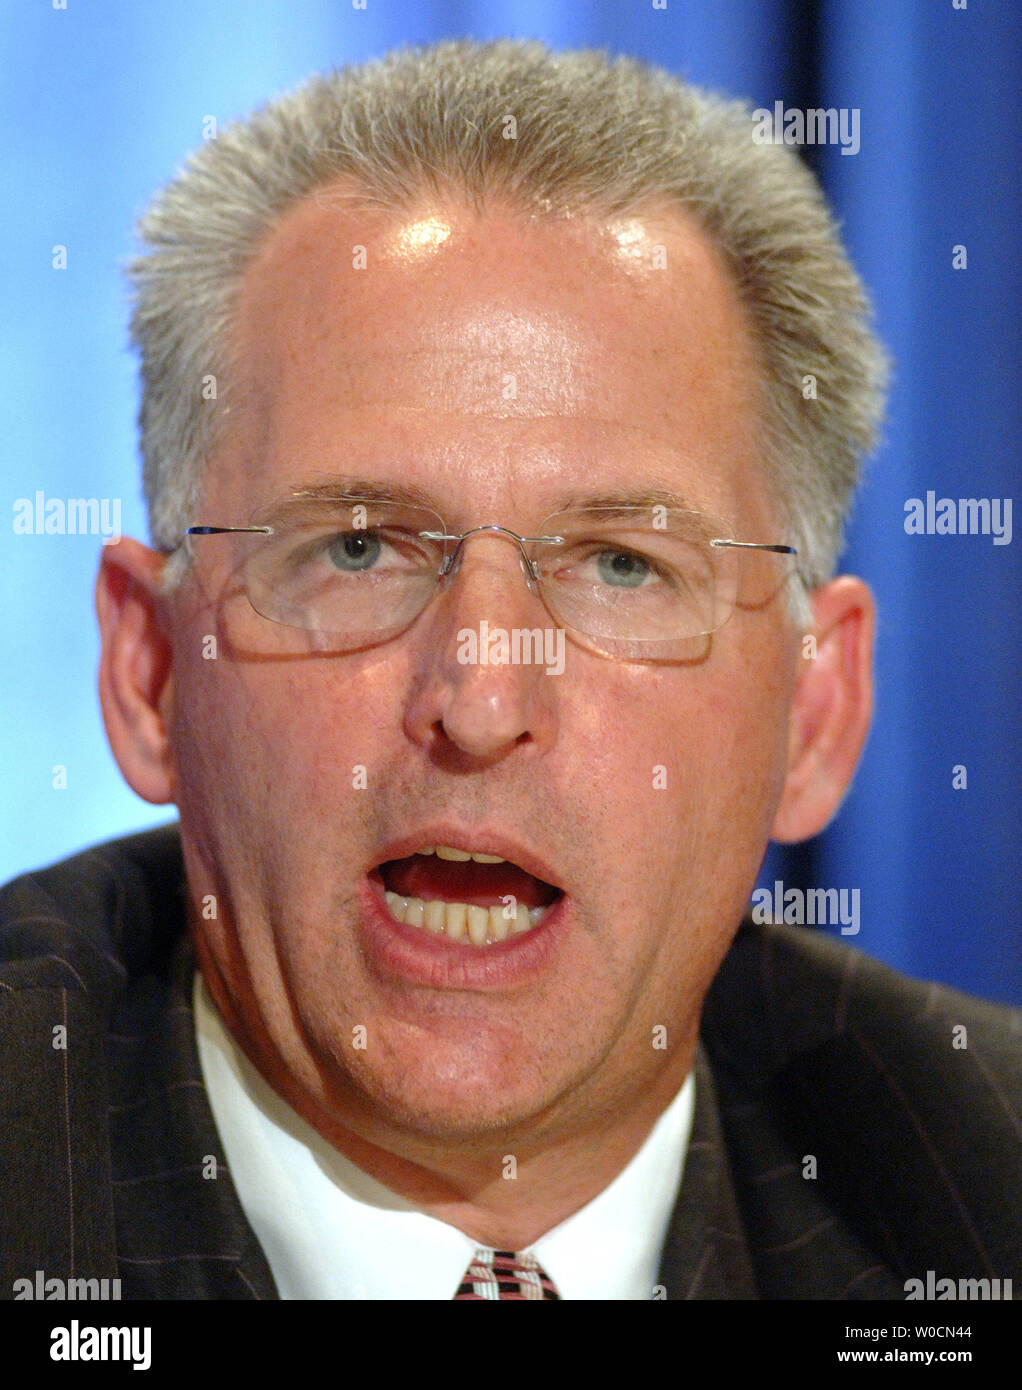 Gregory Wasson, president of Walgreens Health Services, discusses the pricing of drugs during a discussion sponsored by AARP in Washington on June 9, 2005.   (UPI Photo/Roger L. Wollenberg) Stock Photo